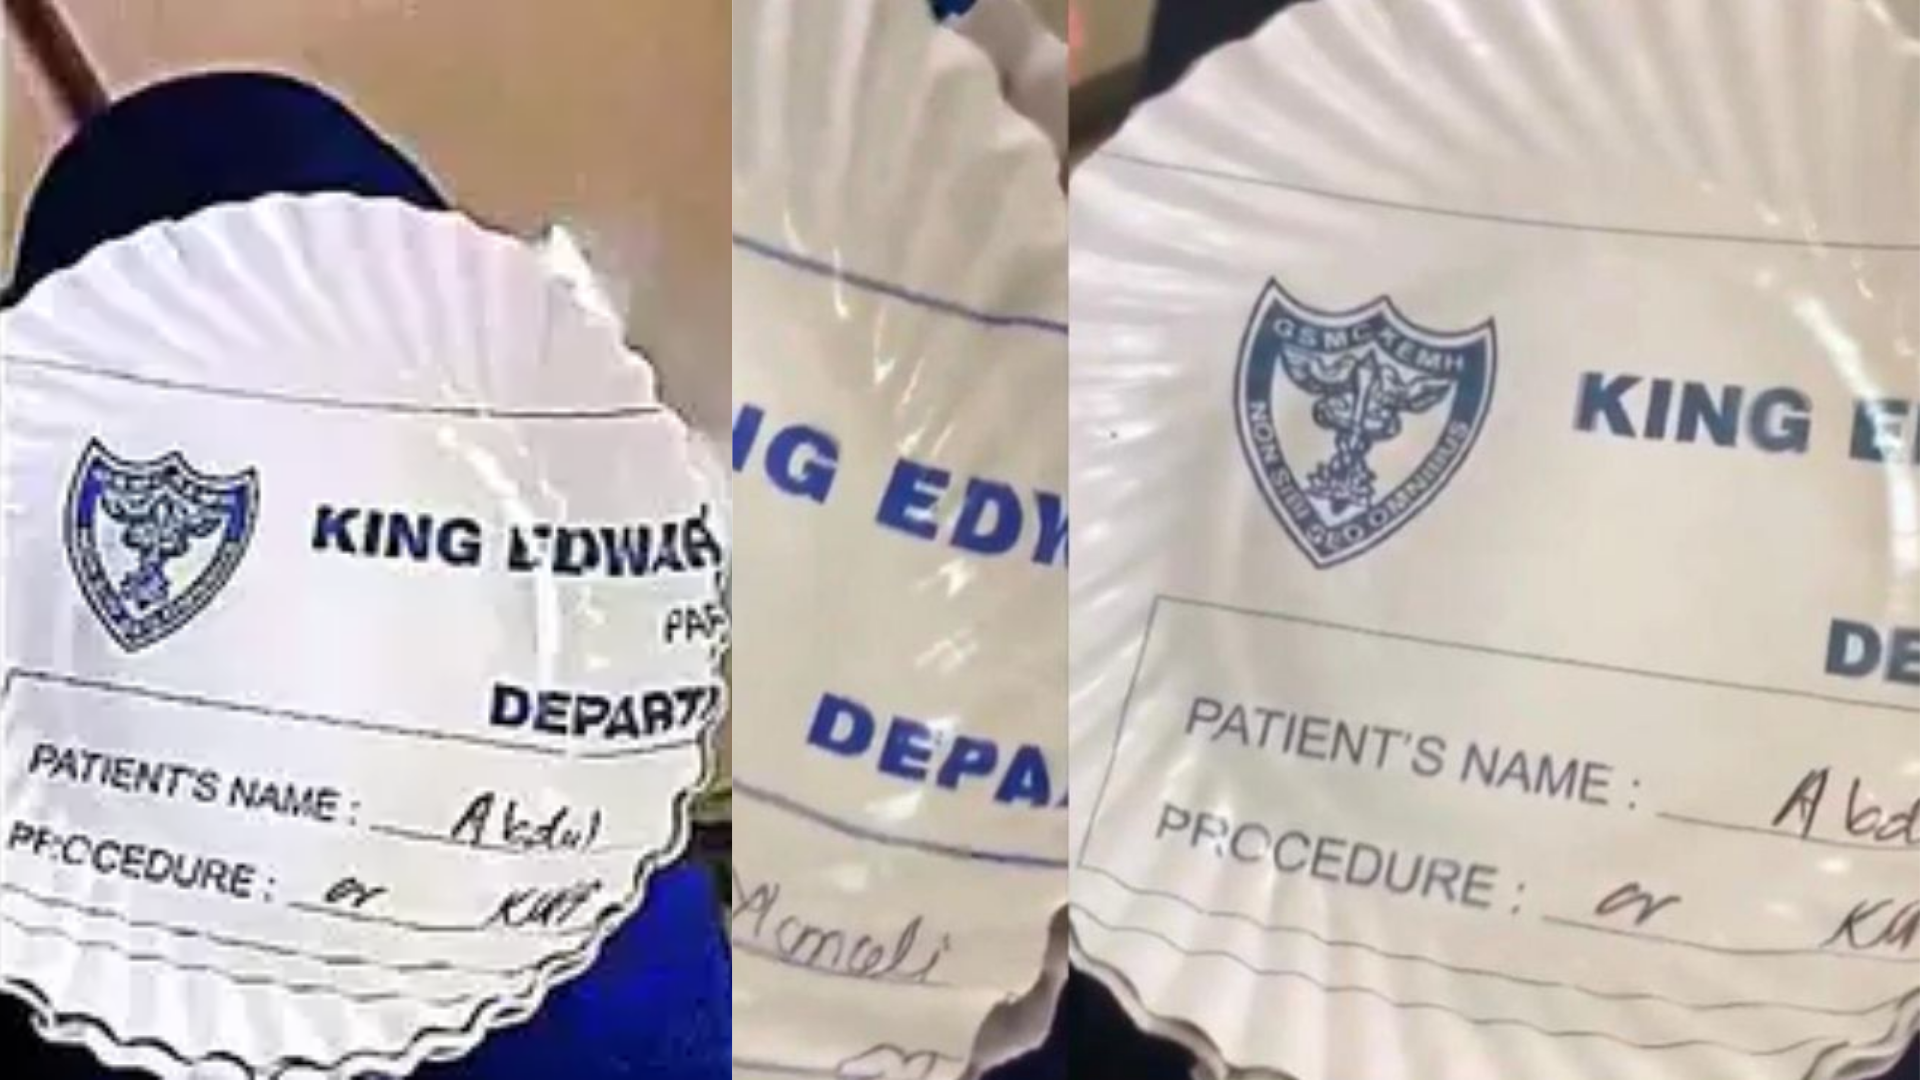 Sustainable Or Reckless? Hospital Using Plates Made Up Of Patient’s Report | Viral Video